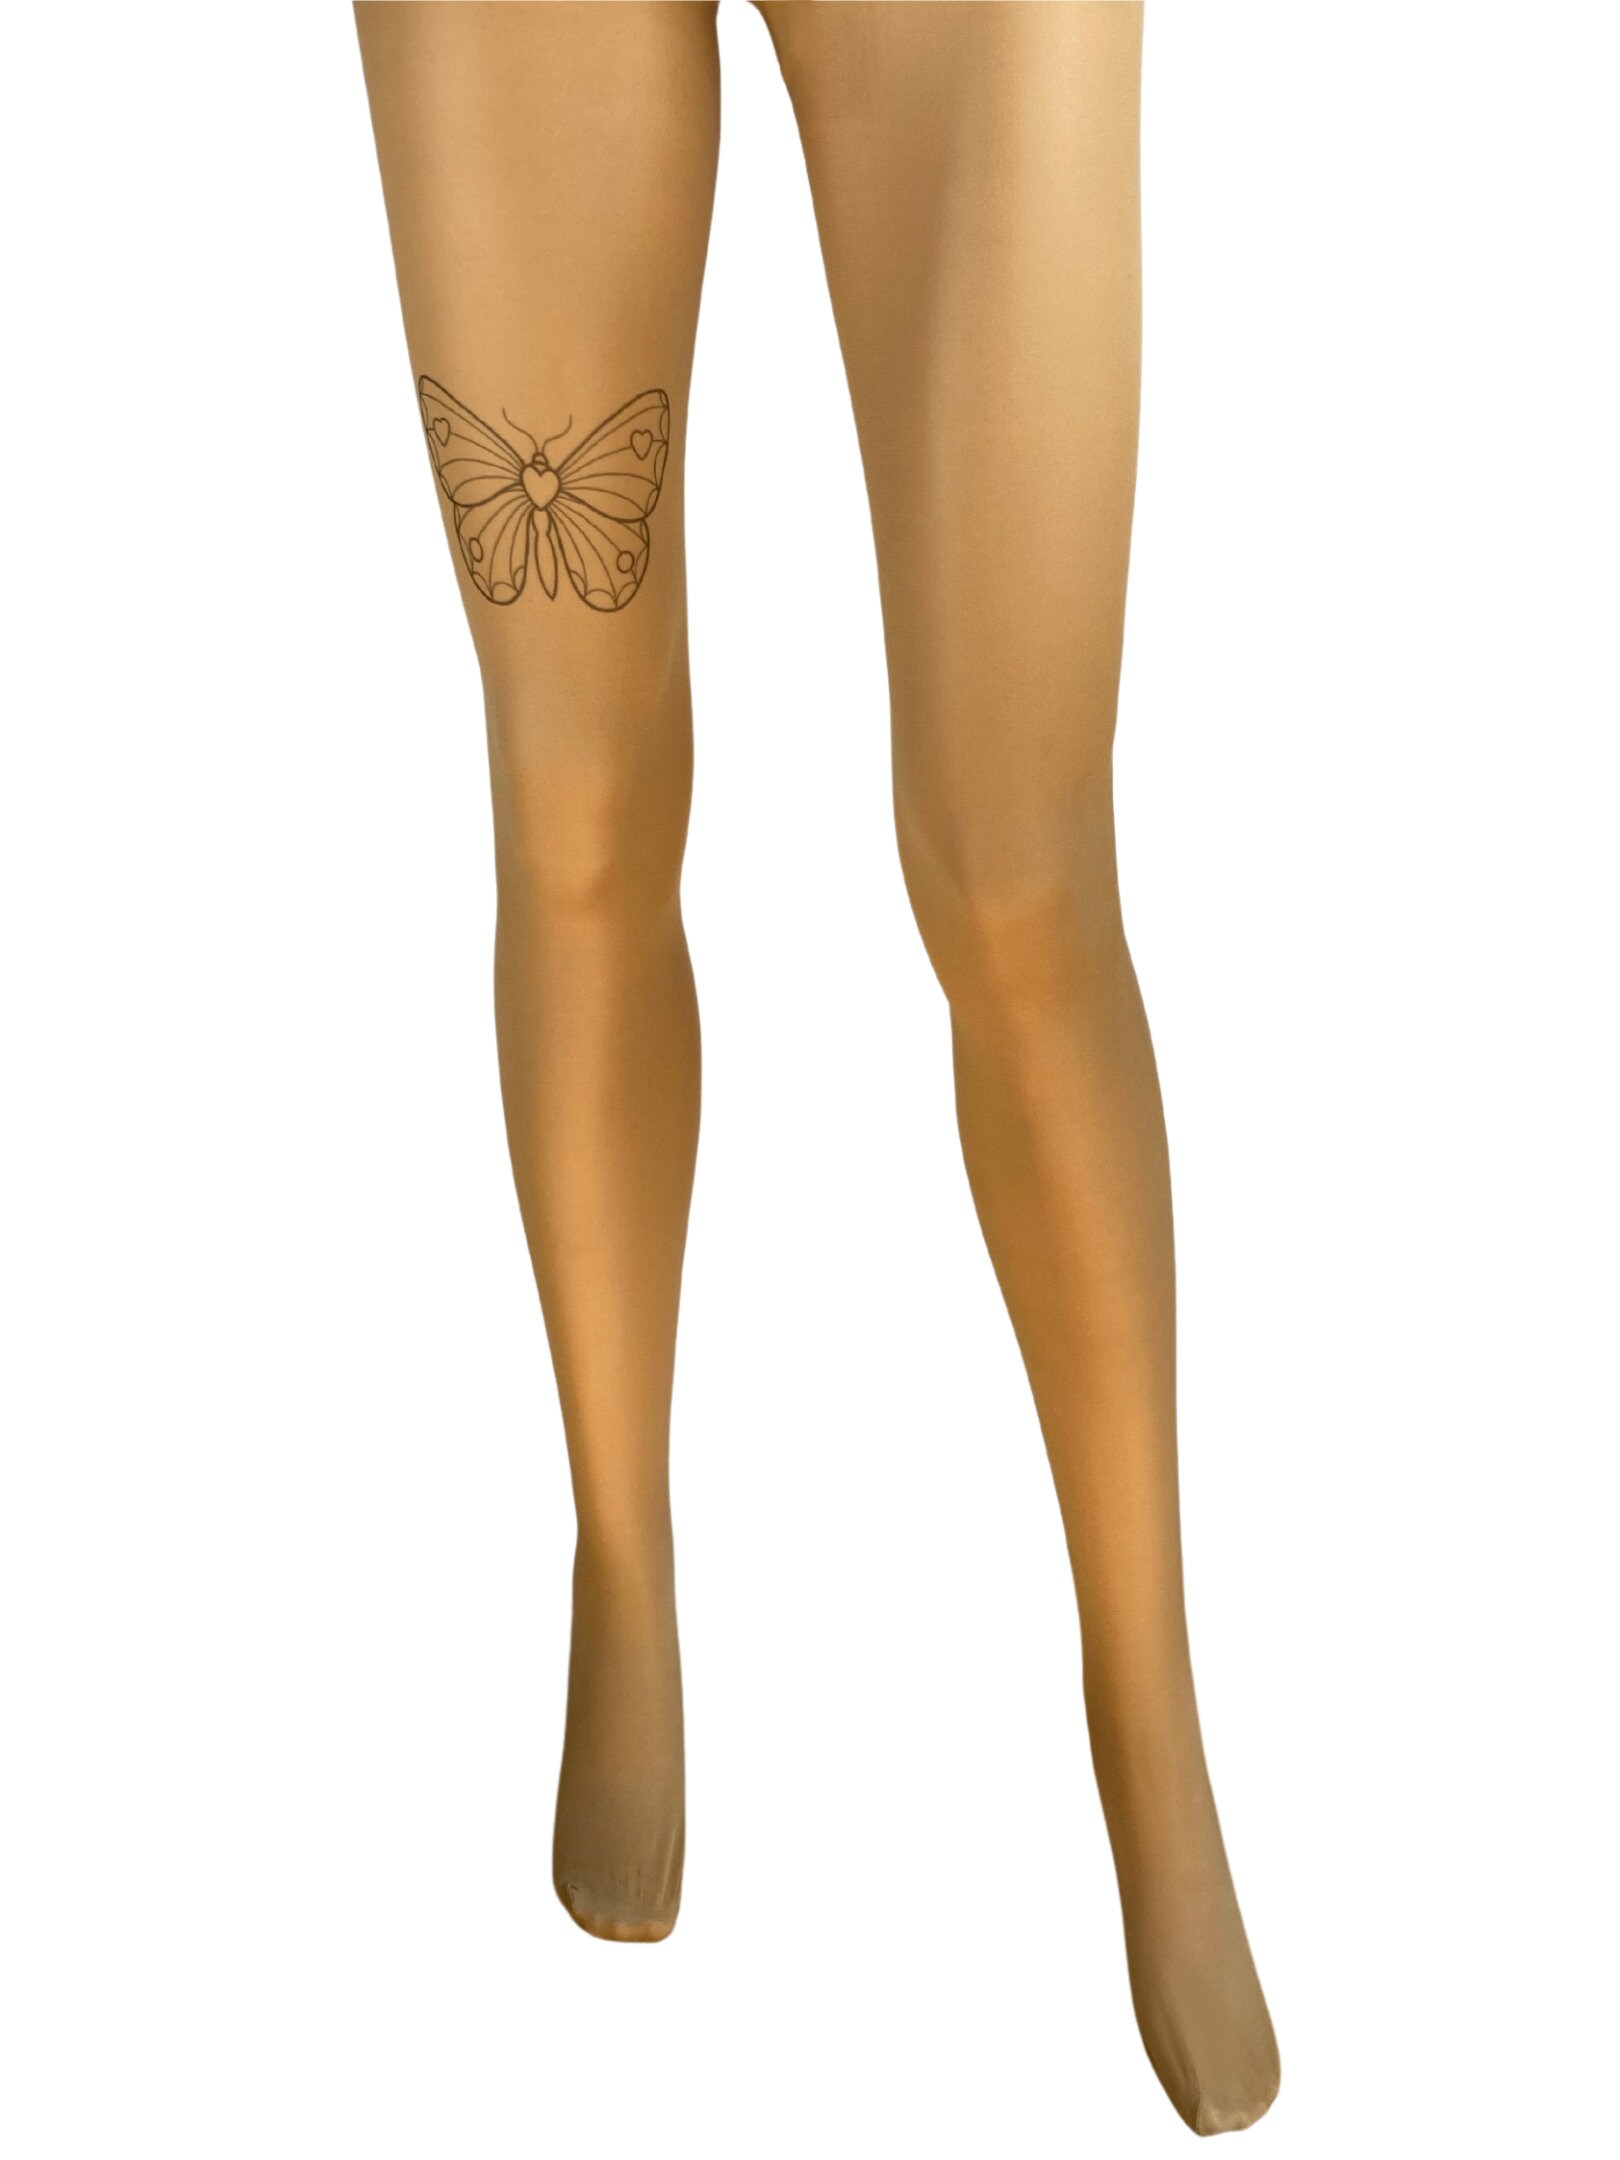 Tattoo Tights Butterfly / Patterned Tights: Funky, Fashionable